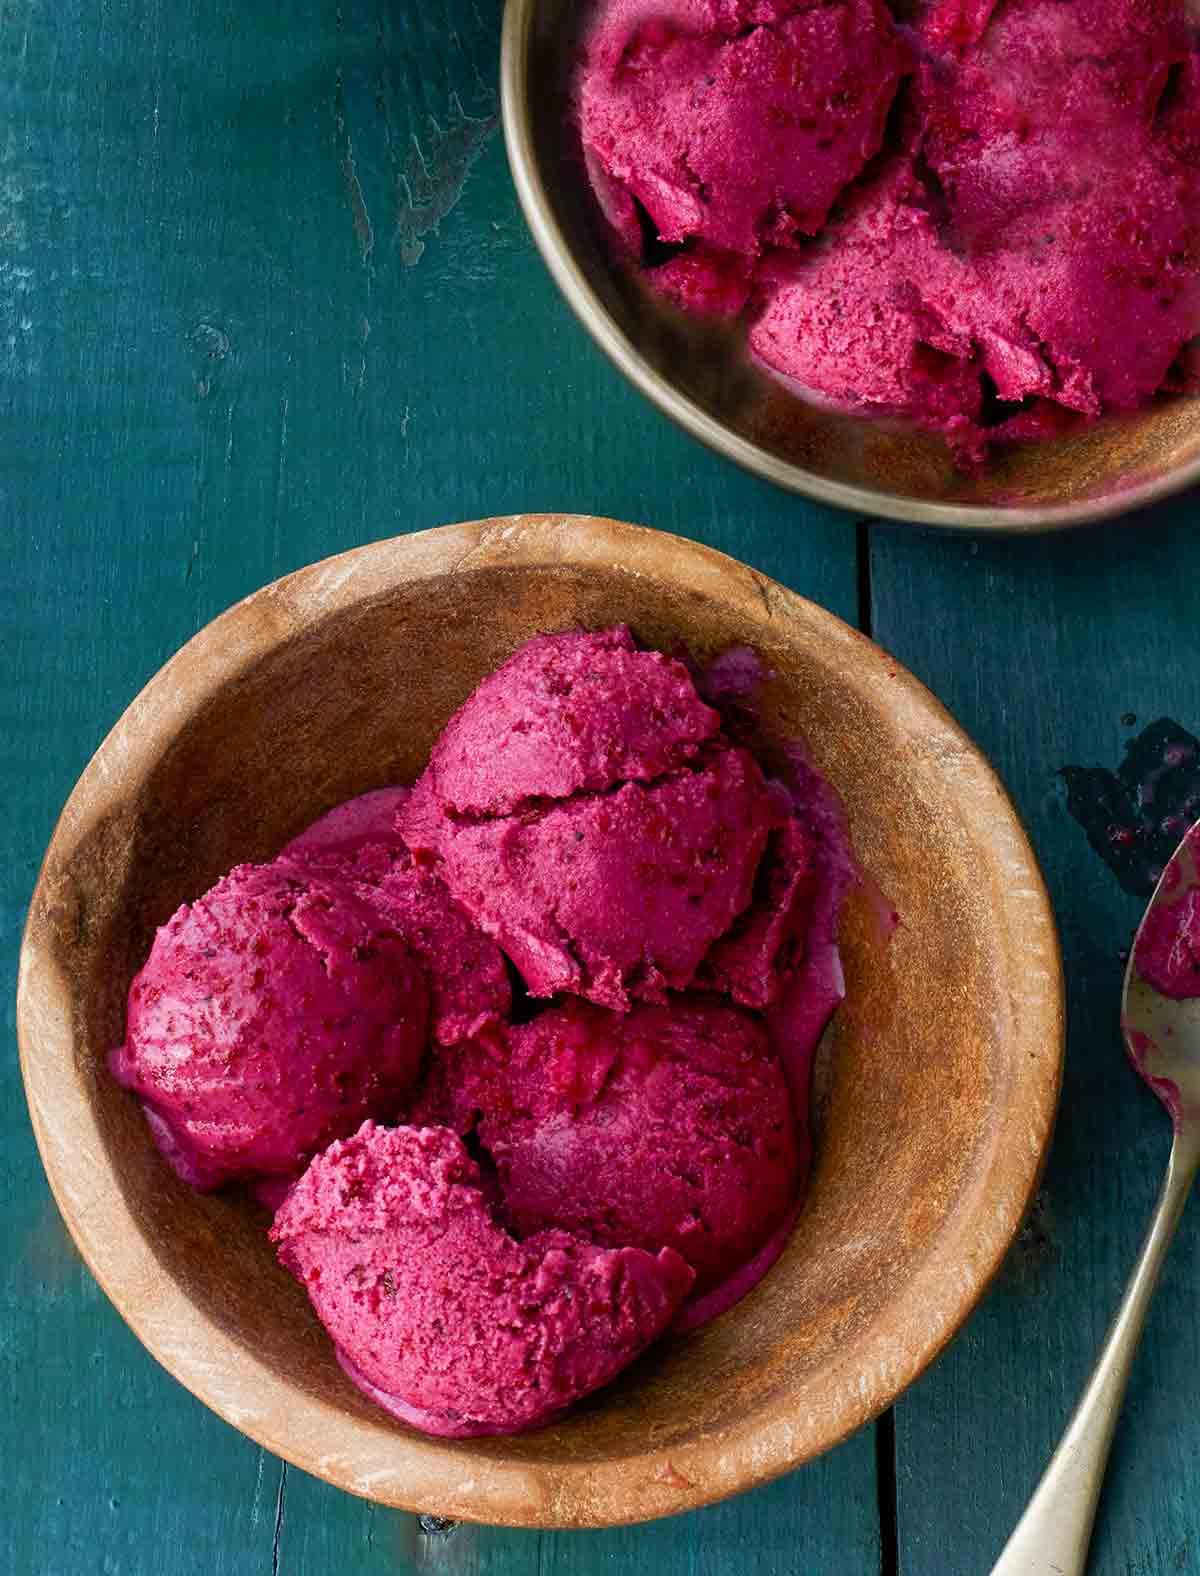 Four scoops of blueberry frozen yogurt in a wooden bowl with a spoon resting beside it.